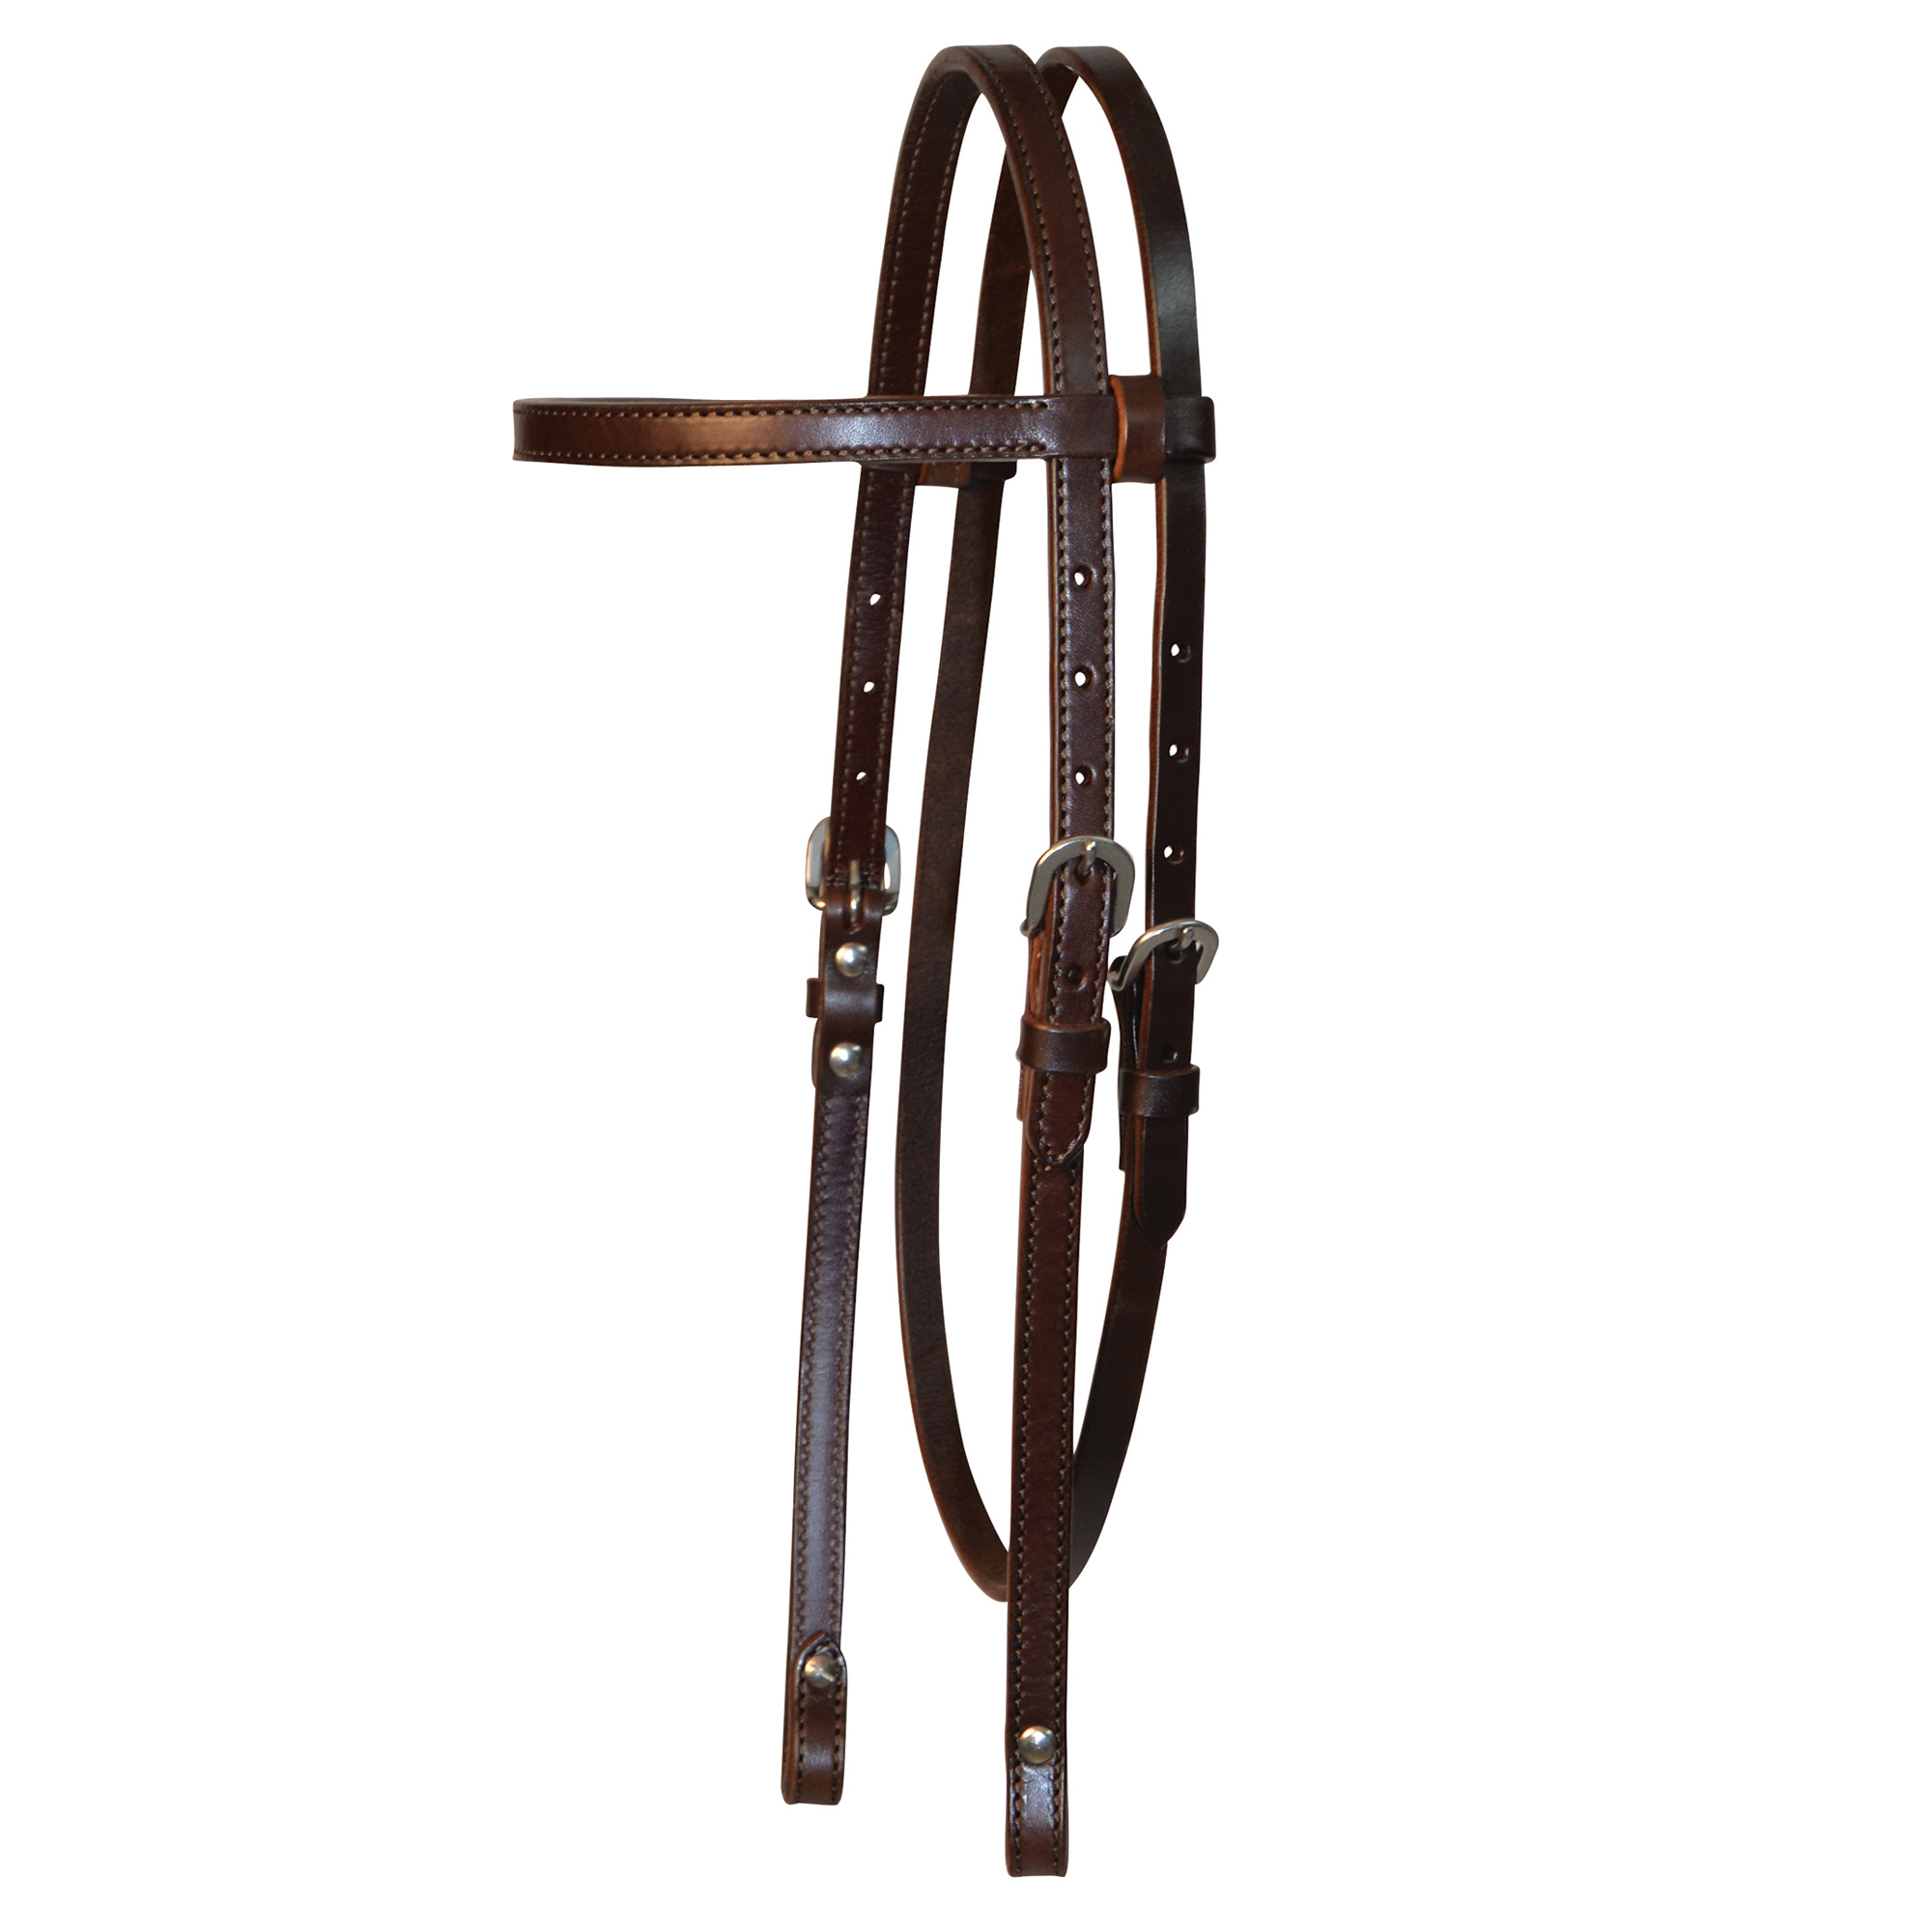 5/8" Plain Browband Headstall by Circle Y